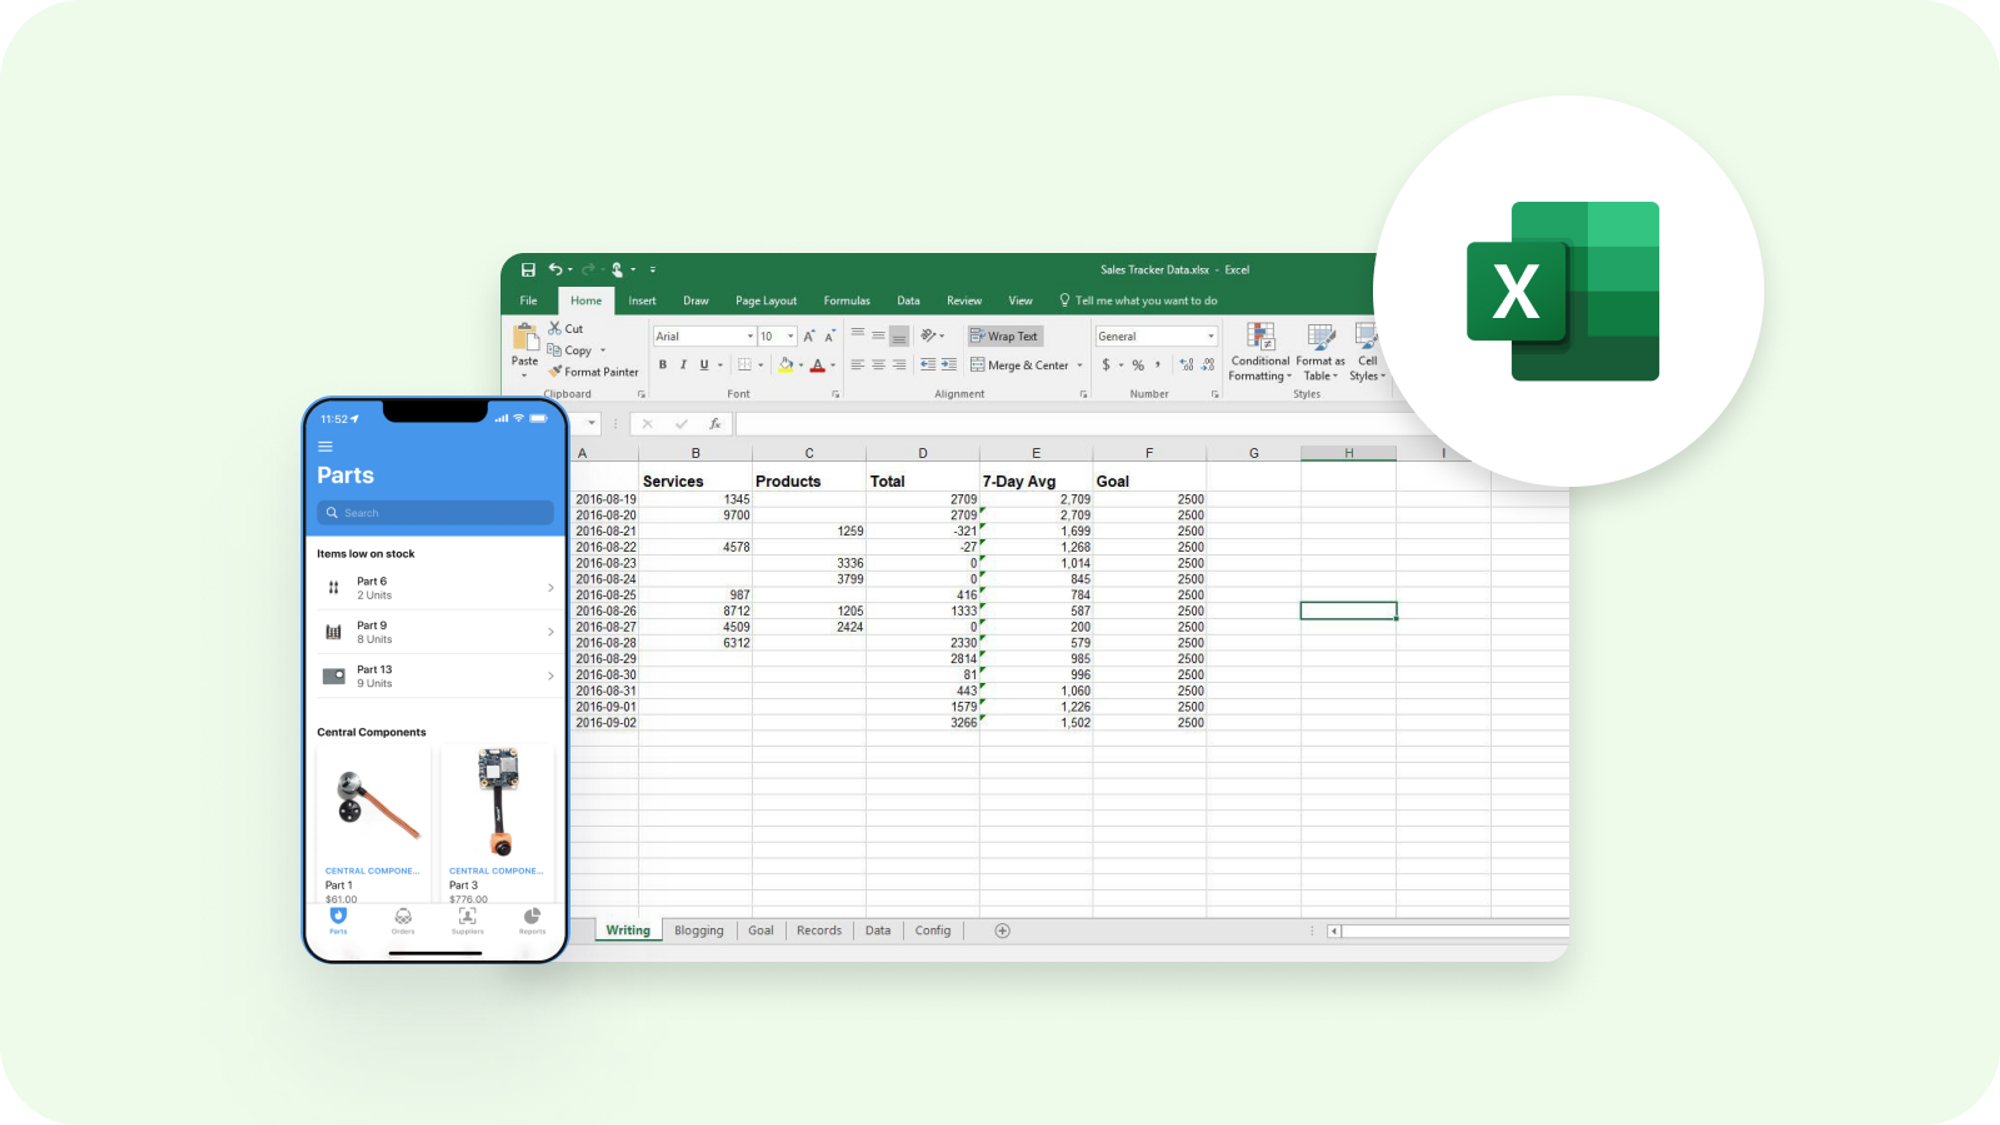 How to Build an Excel-Based Web Application With Glide